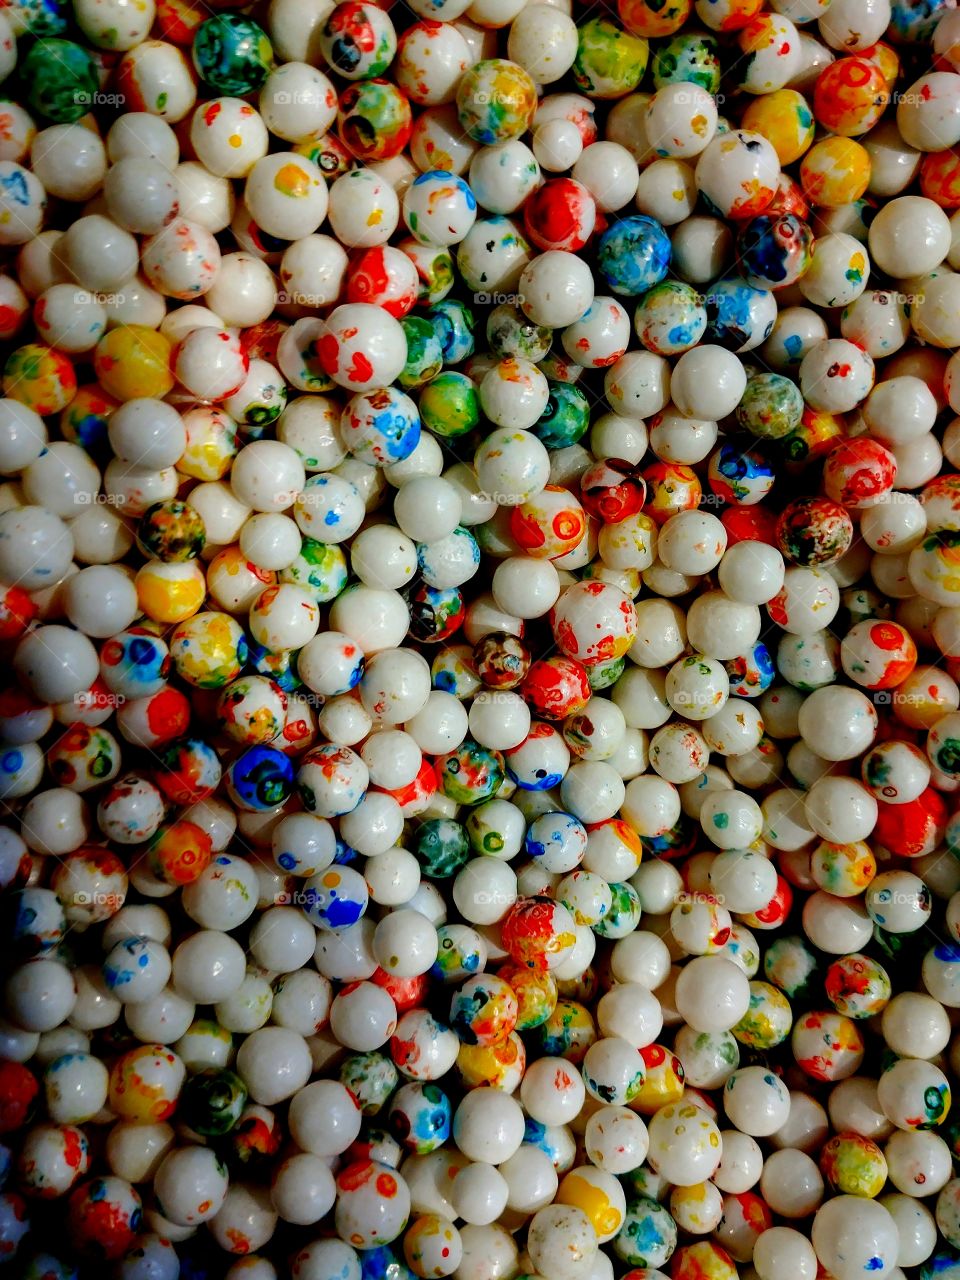 Bulk foods drawers can make some great photos. This are mini jawbreakers in beautiful colors.